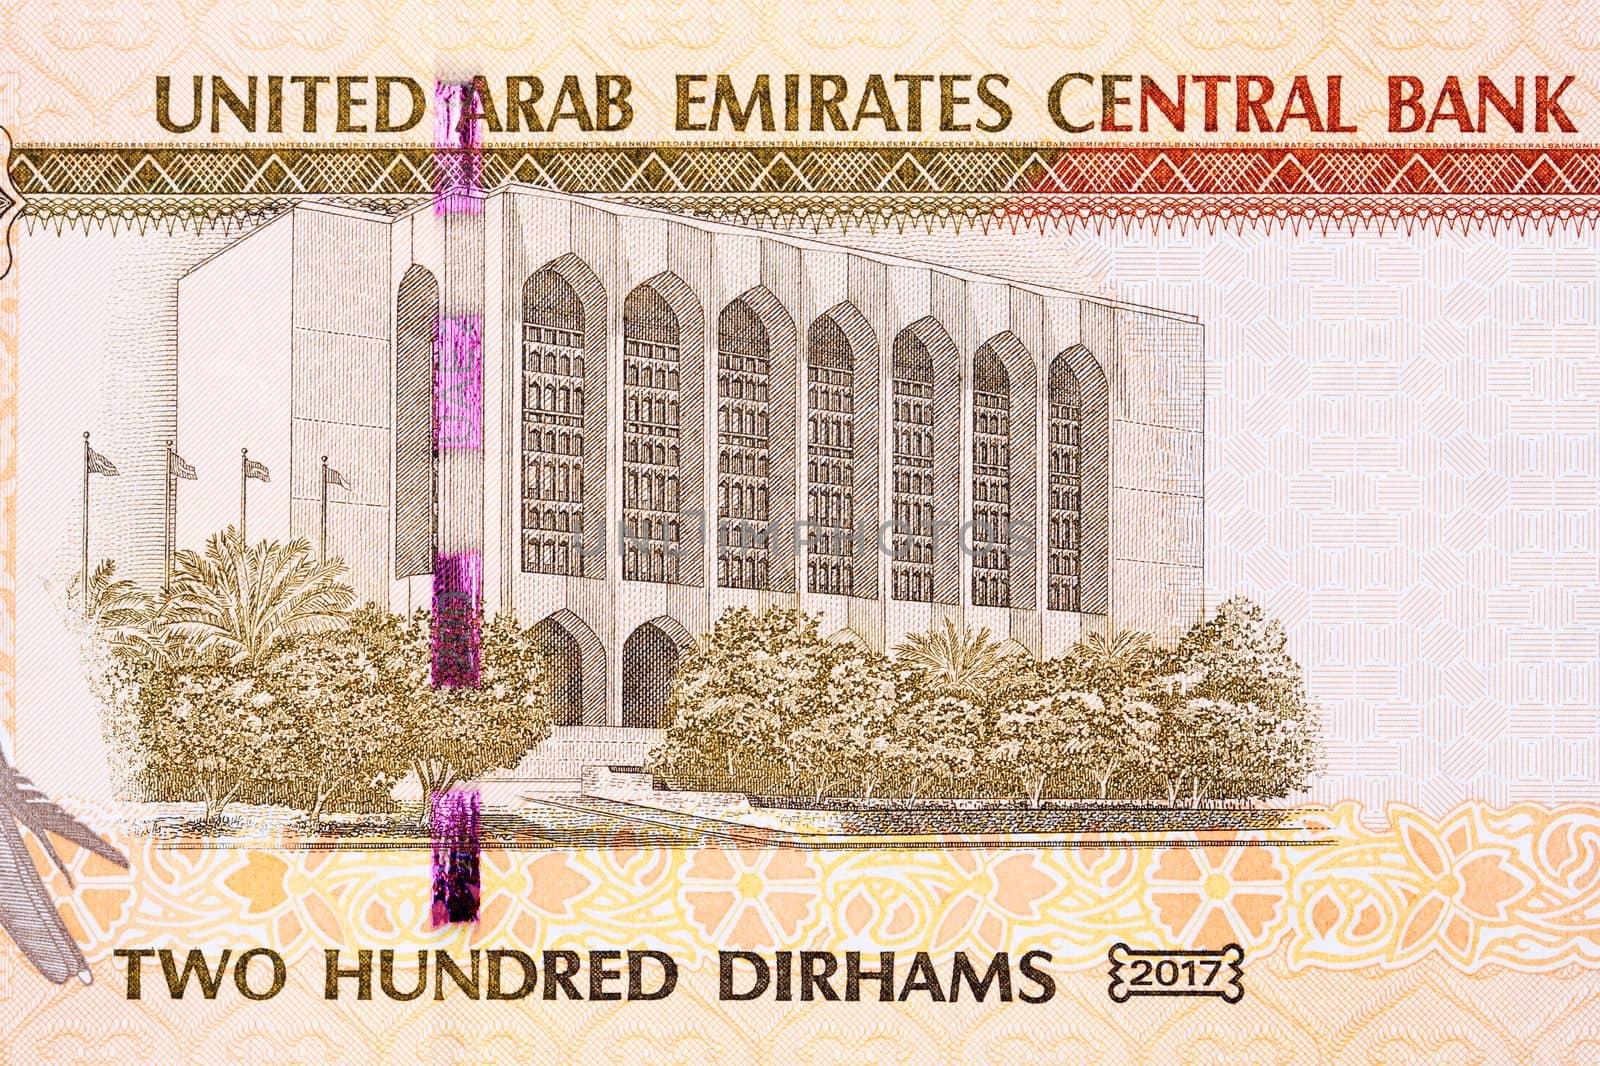 Central Bank Building from United Arab Emirates money by johan10